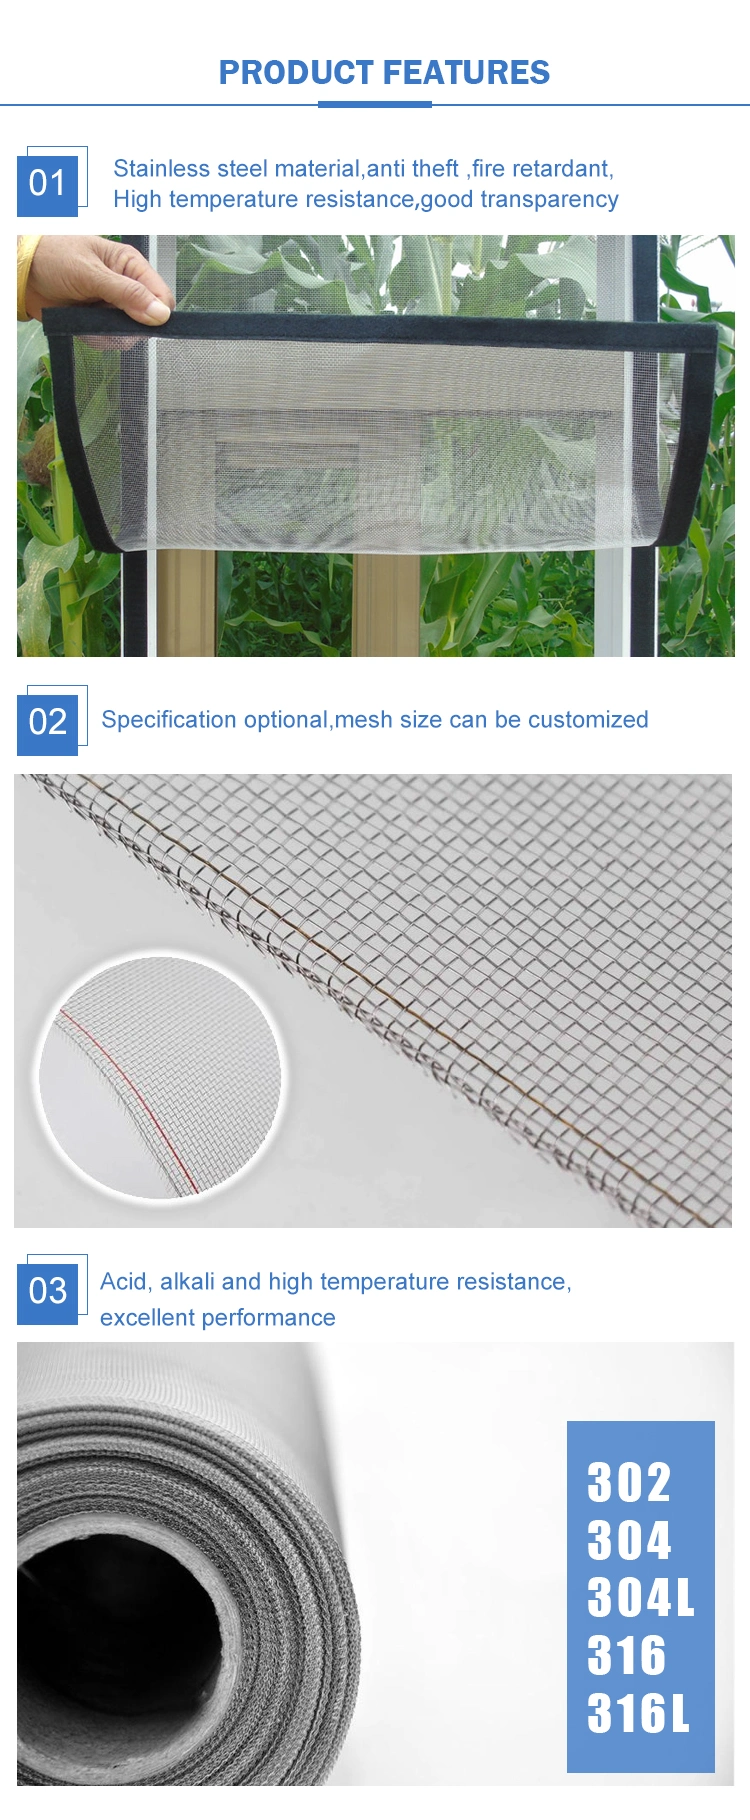 Anping Stainless Steel Insect Screen Wire Mesh Window Screen